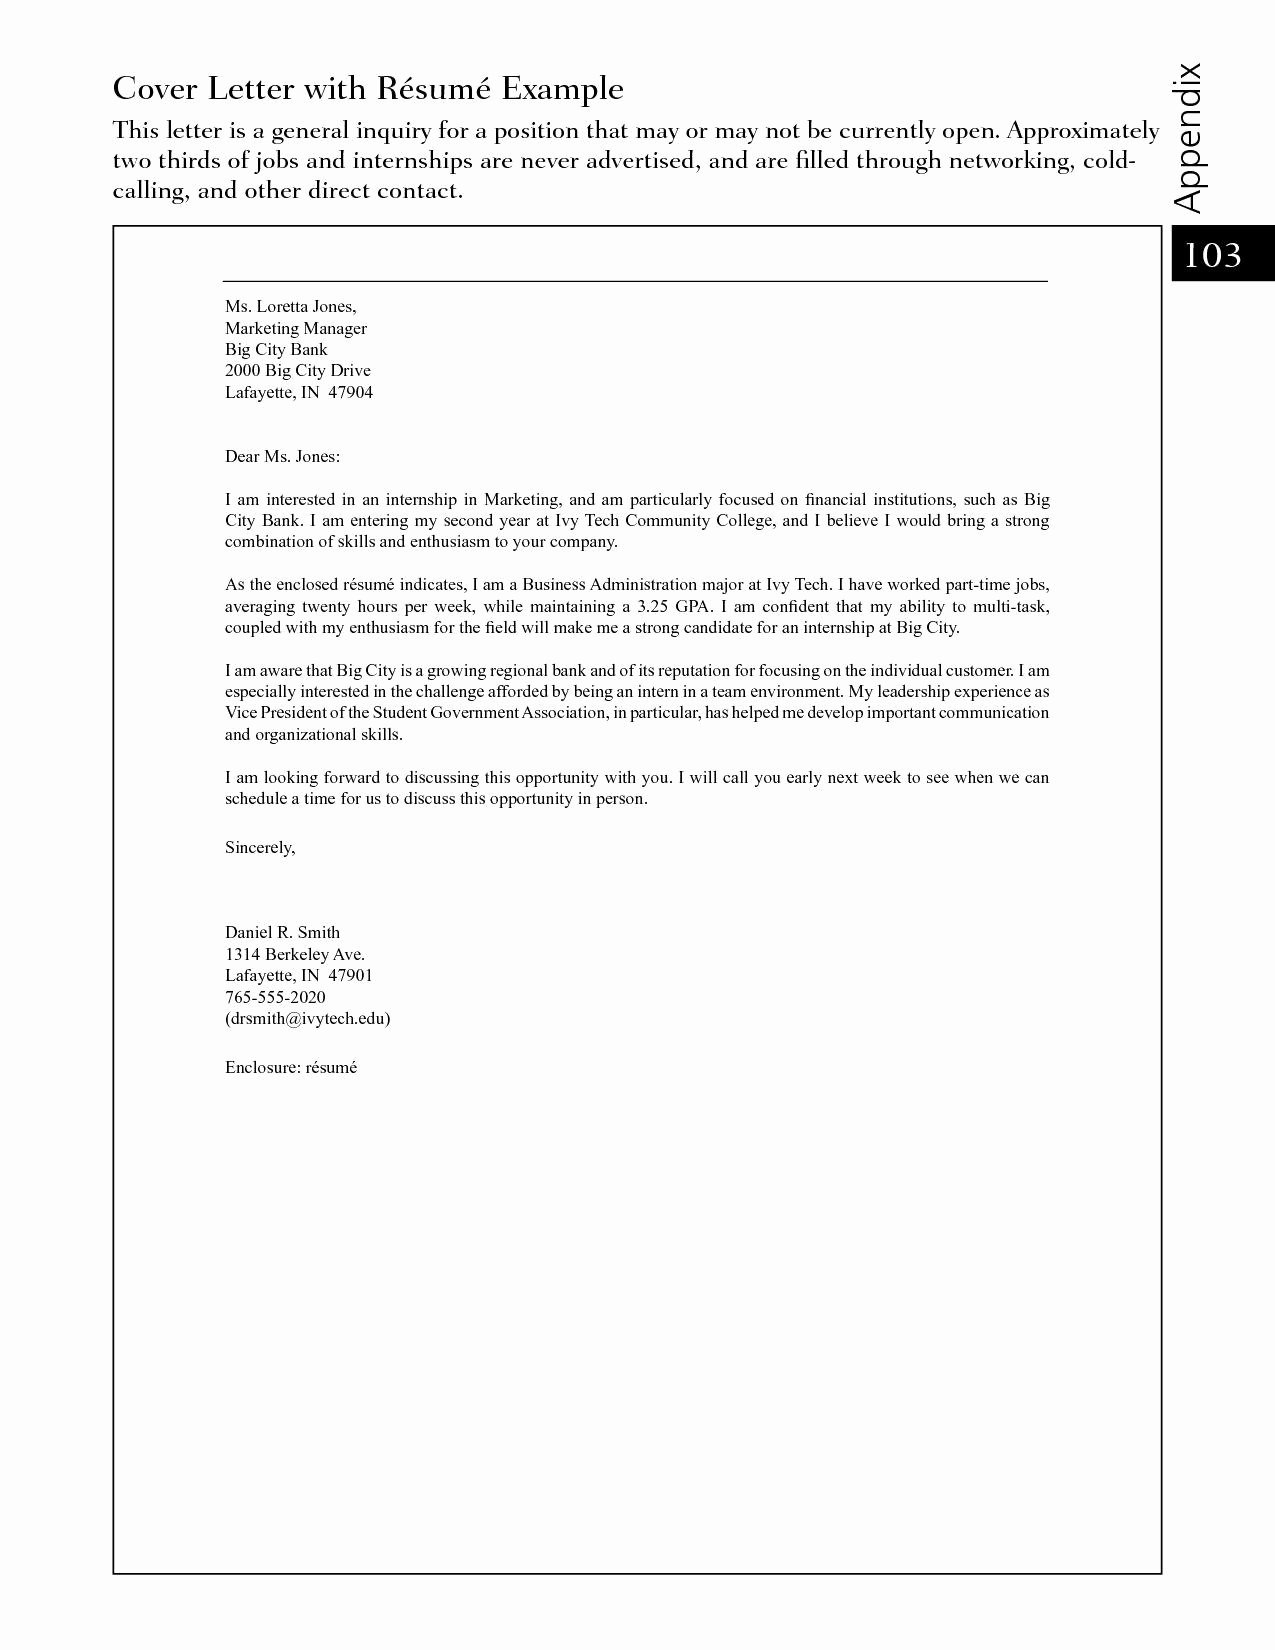 Advocacy Manager Cover Letter  Cover Letter Resume Ideas  Tedata inside Advocacy Letter Template